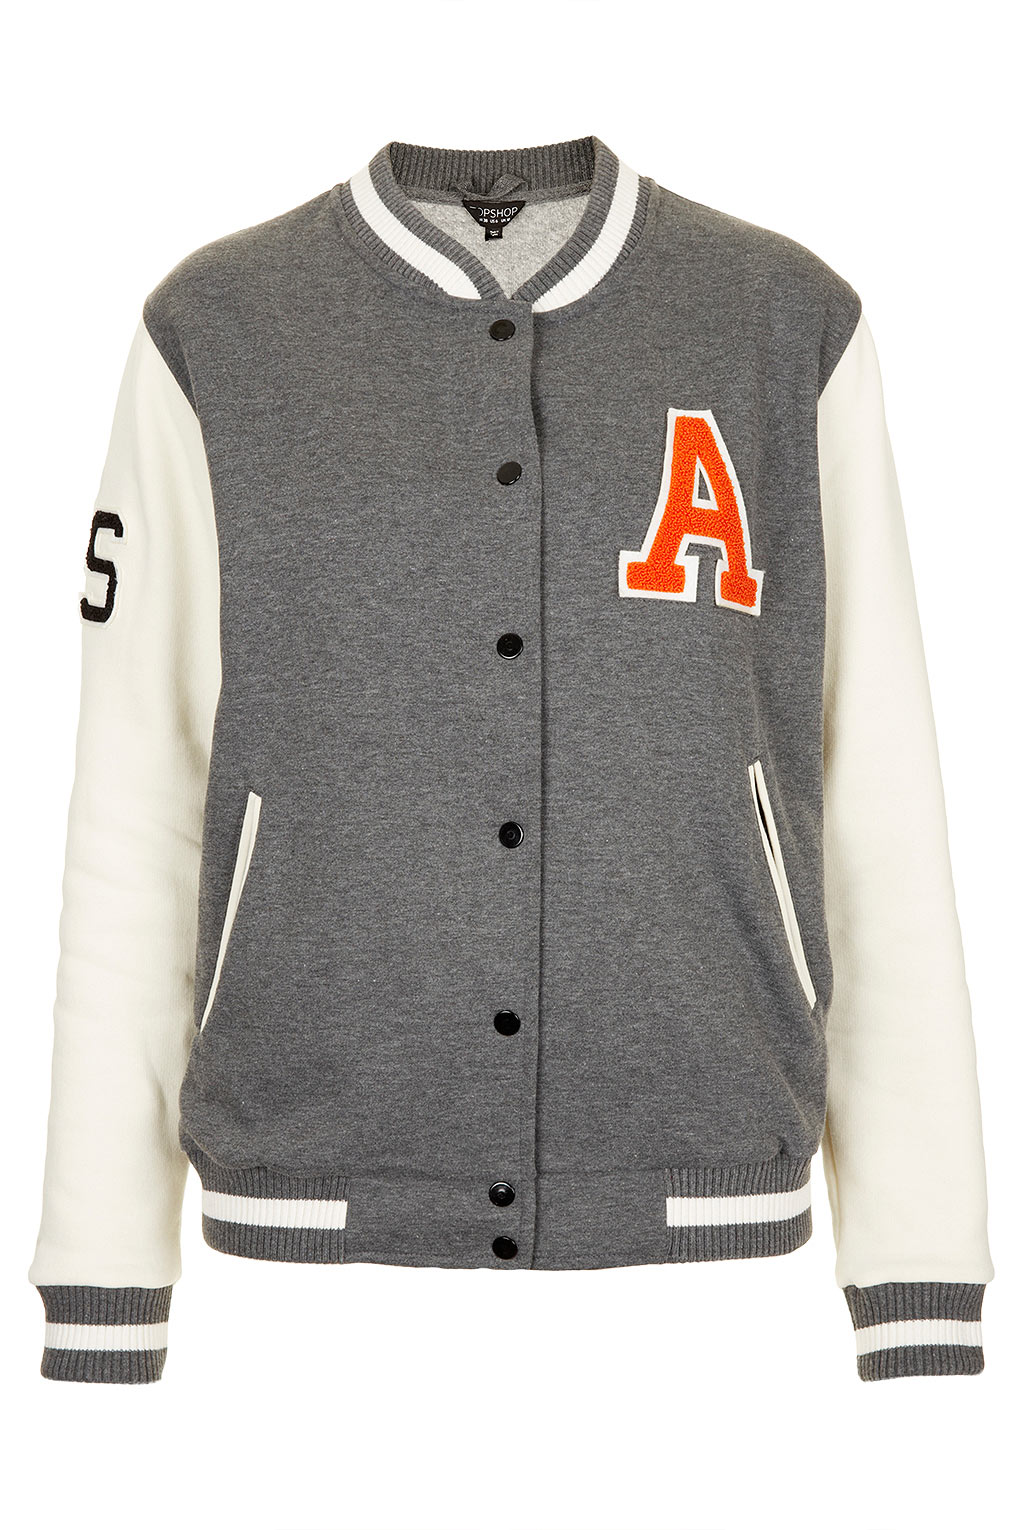 fashionloco: to ALL GUYS: were you on a varsity sports team?